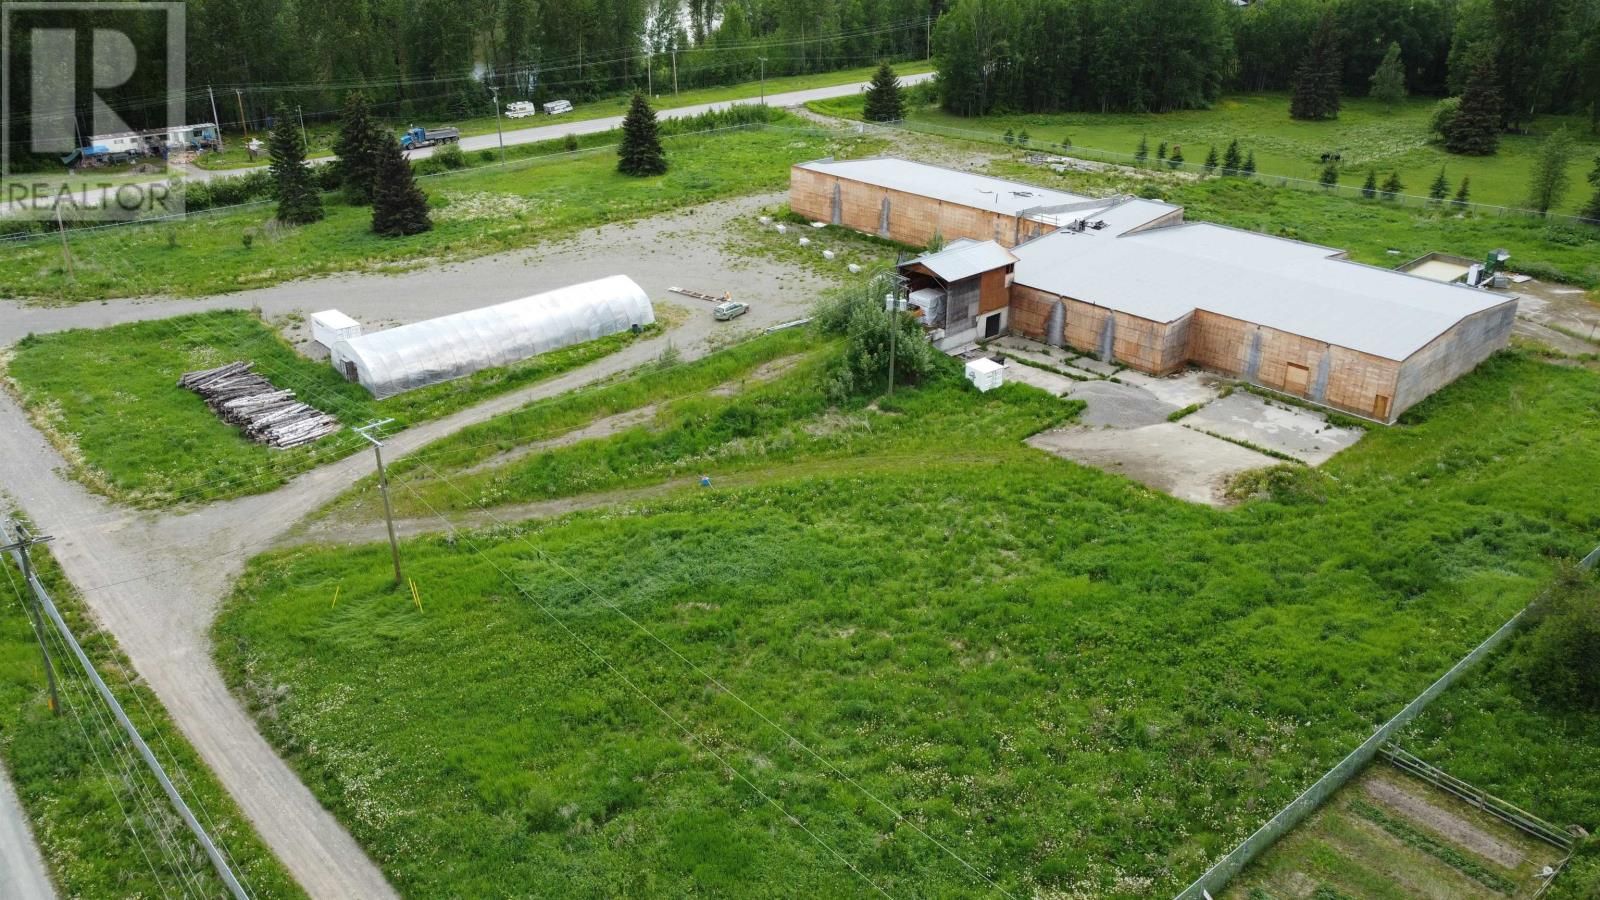 Main Photo: 1510 PG PULP MILL ROAD in PG City North: Agriculture for sale : MLS®# C8050032